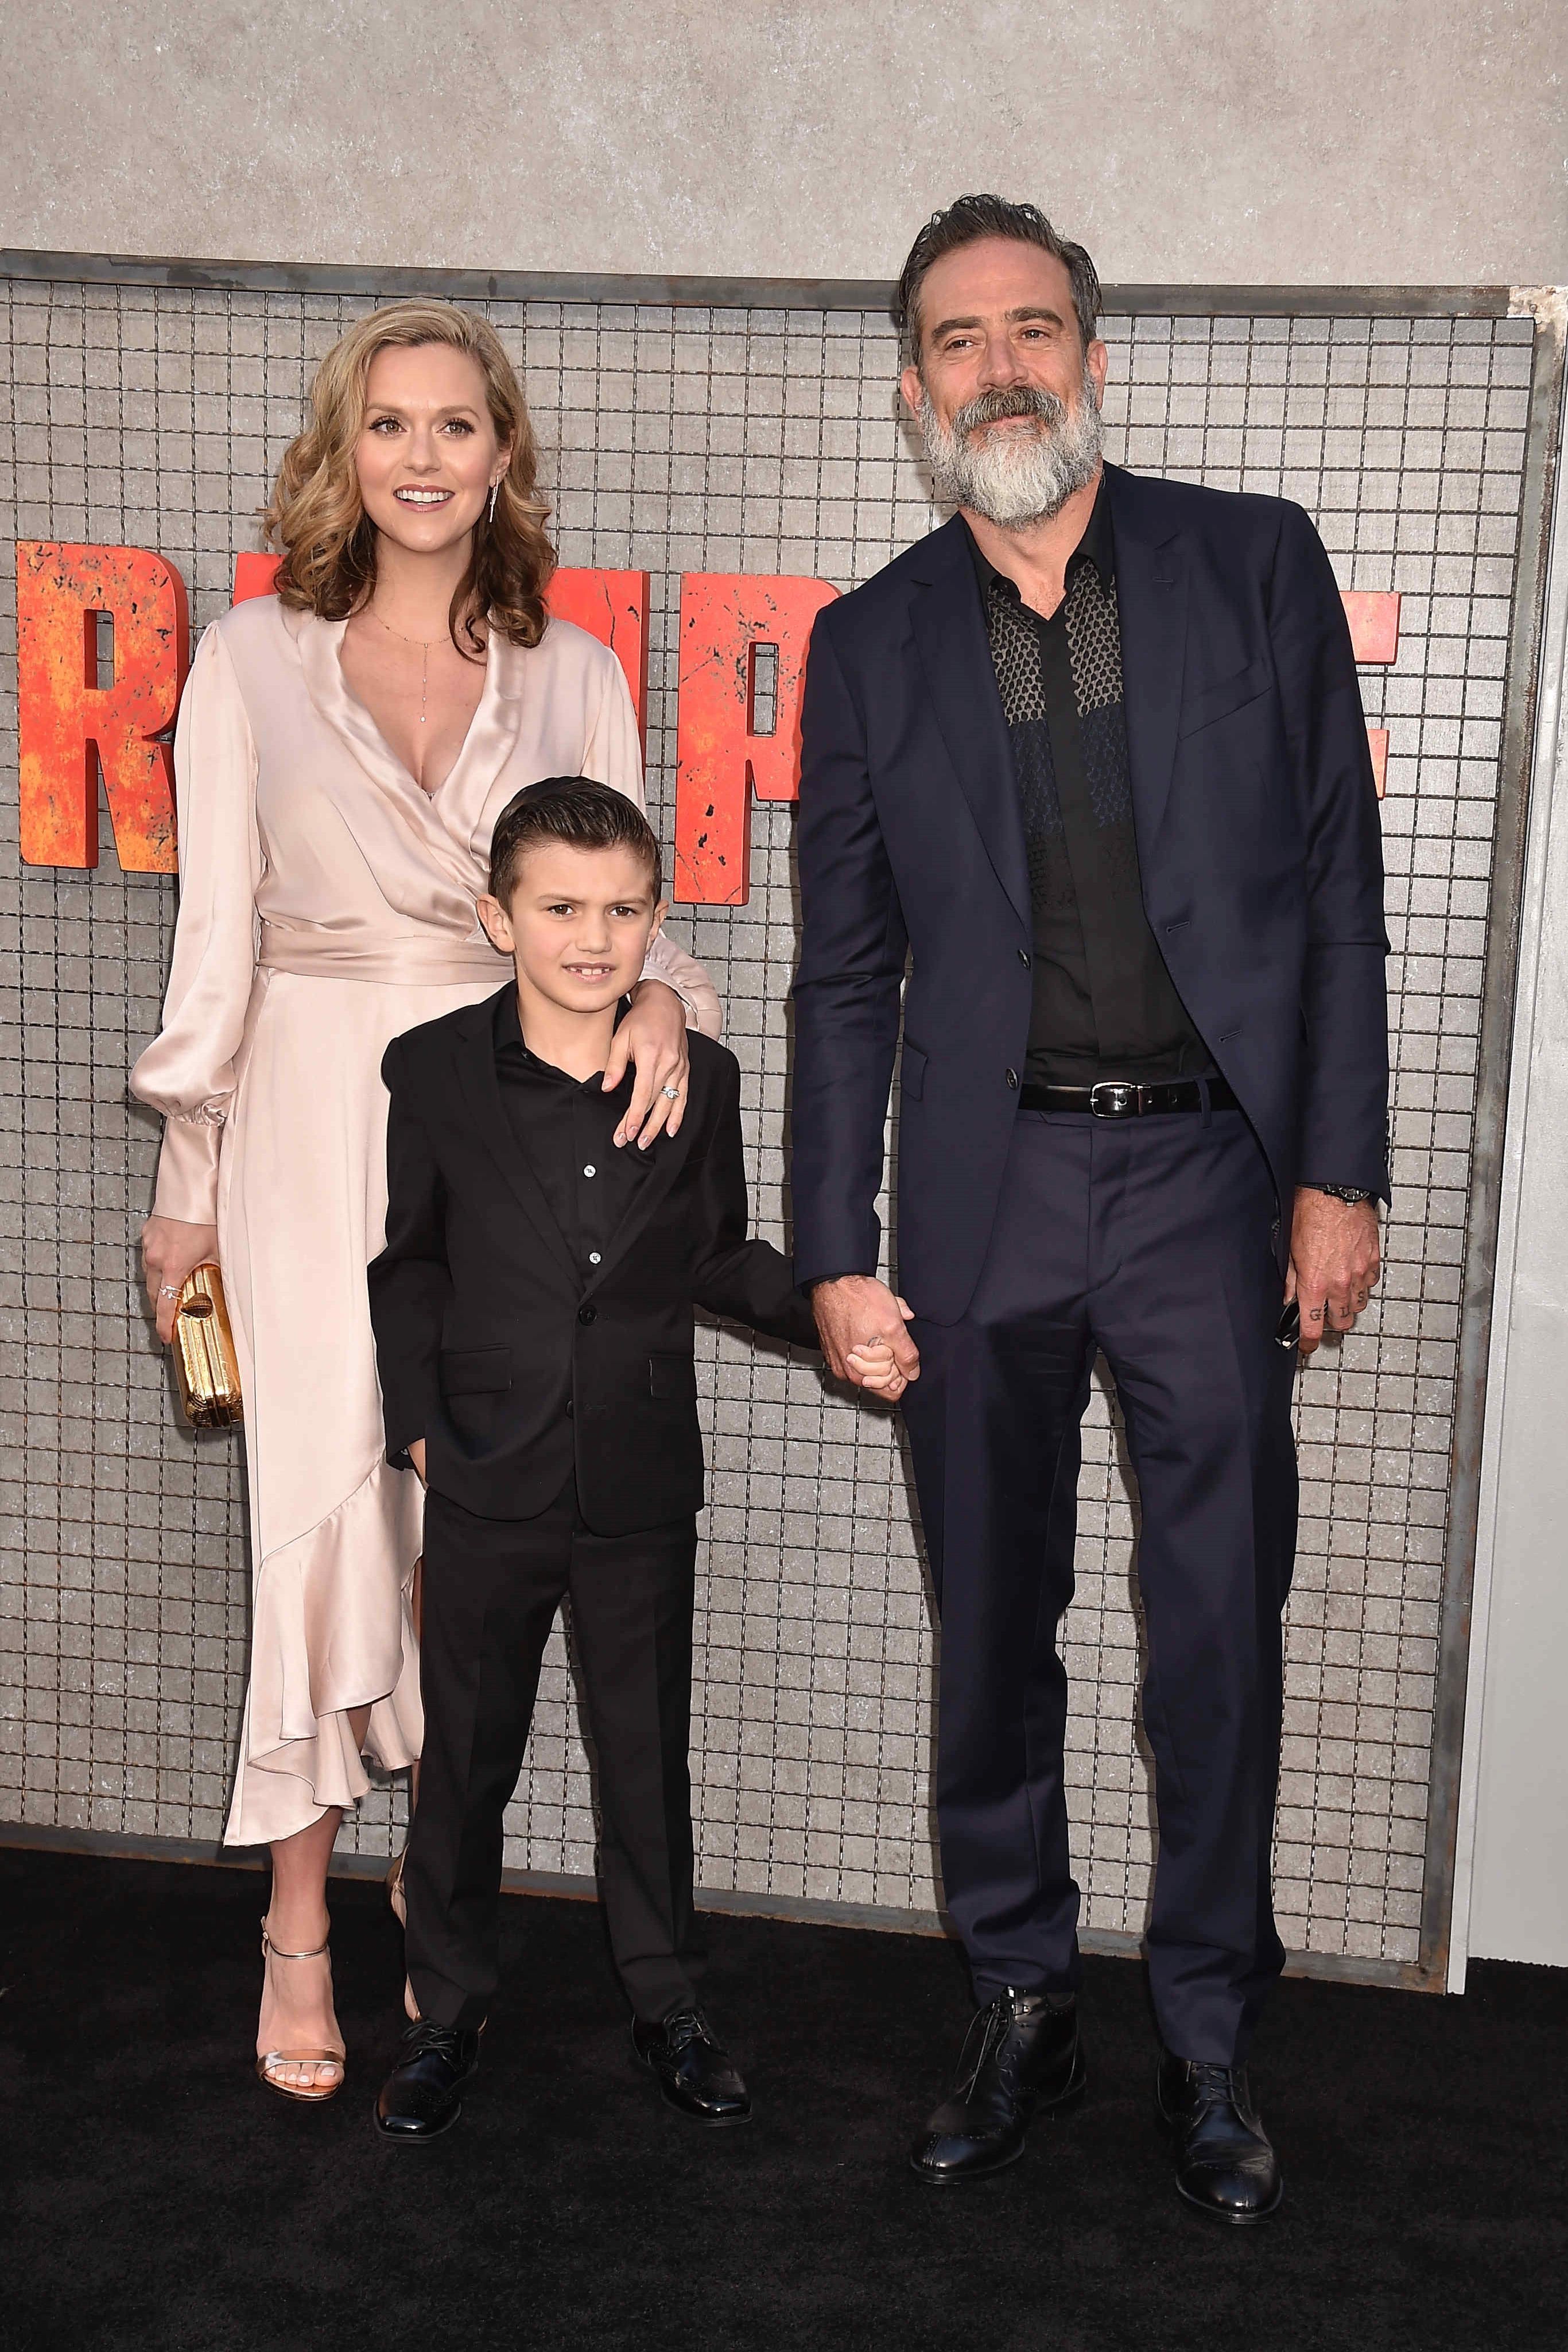 <p>The public didn't even really know Jeffrey Dean Morgan and wife Hilarie Burton, who married in 2019, were a couple until after she'd given birth to their first child, son Gus, in 2010. Now they have a second child, daughter George, who arrived in early 2018. But how did they meet? Mutual friend Jensen Ackles set them up on a blind date in 2009. Jensen, who was pals with his "Supernatural" co-star Jeffrey, and wife Danneel Harris, who was friends with her "One Tree Hill" co-star Hilarie, convinced their buddies to come out with them one night. "I [got drunk]. We all did. We ended up back at my house drinking shots of tequila," Jeffrey told HuffPost Live in 2015. That summer, Hilarie joined him in Albuquerque, New Mexico, where he was shooting "The Resident," and their son arrived early the next year.</p>